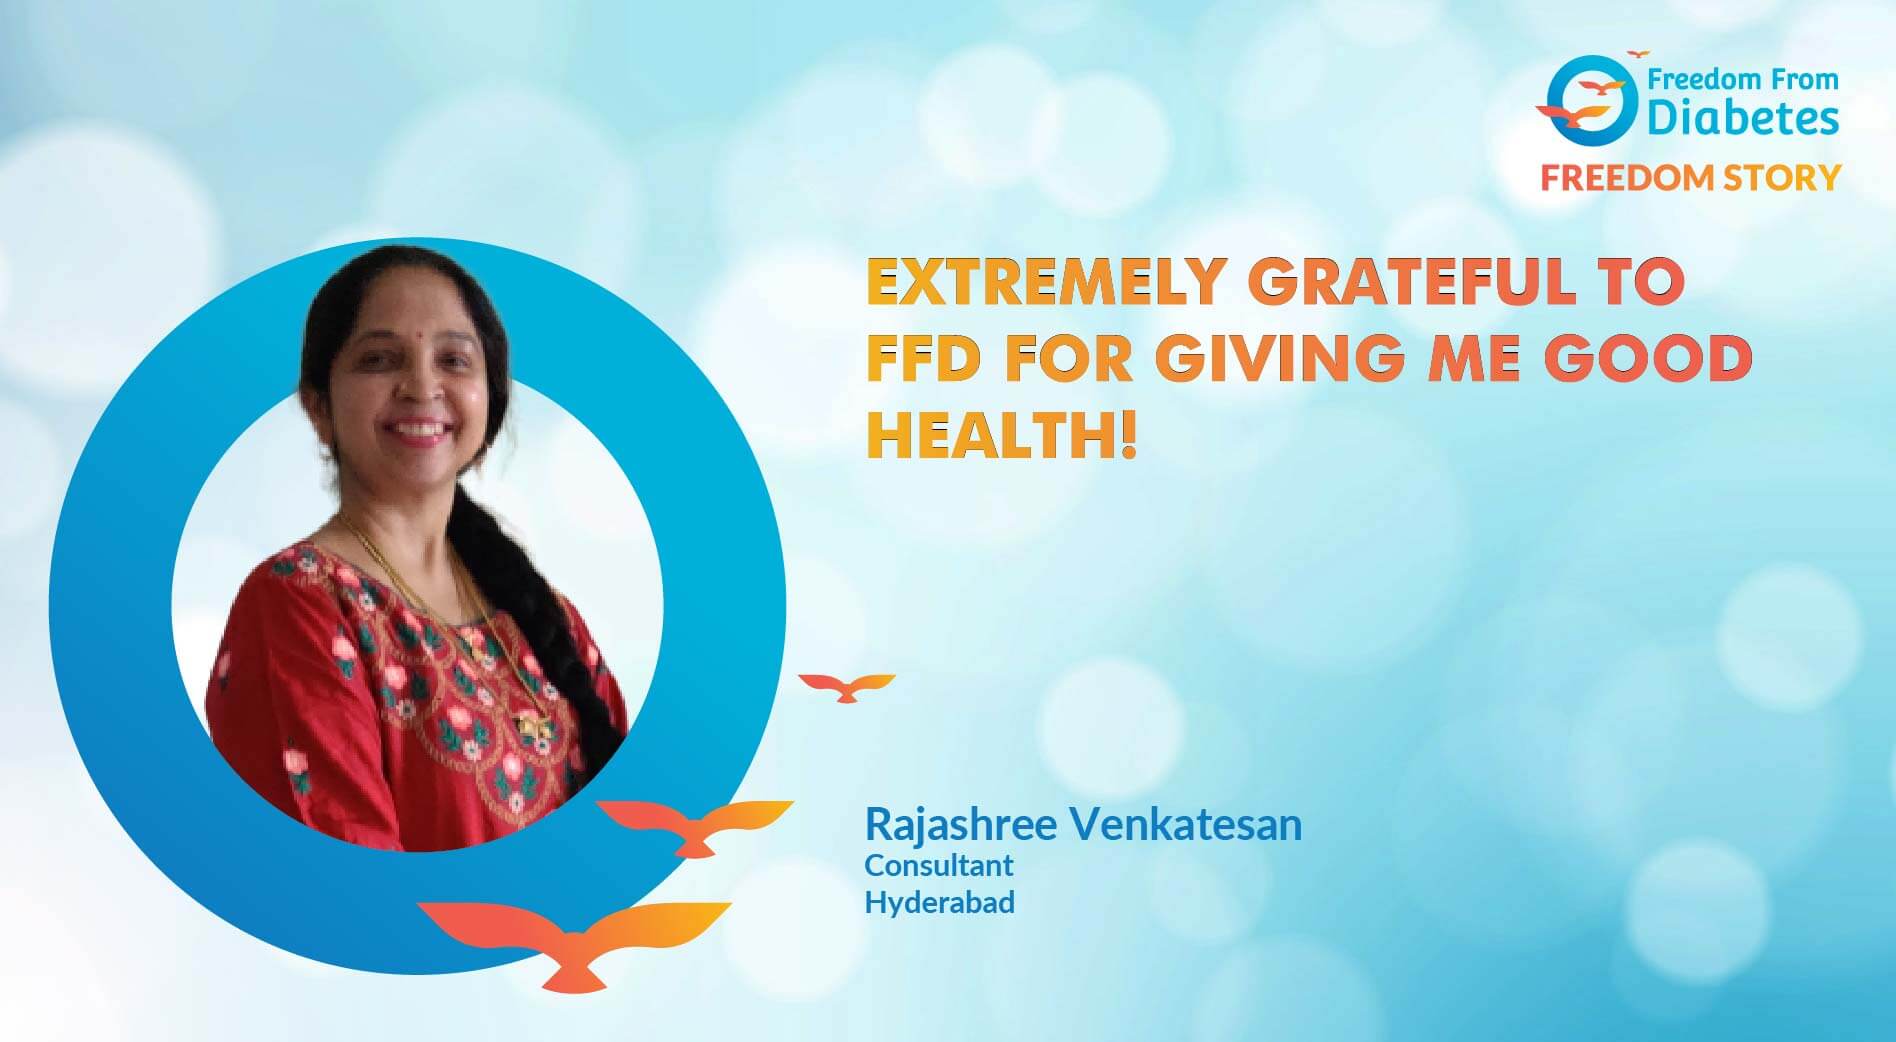 Extremely grateful to FFD for giving me good health!